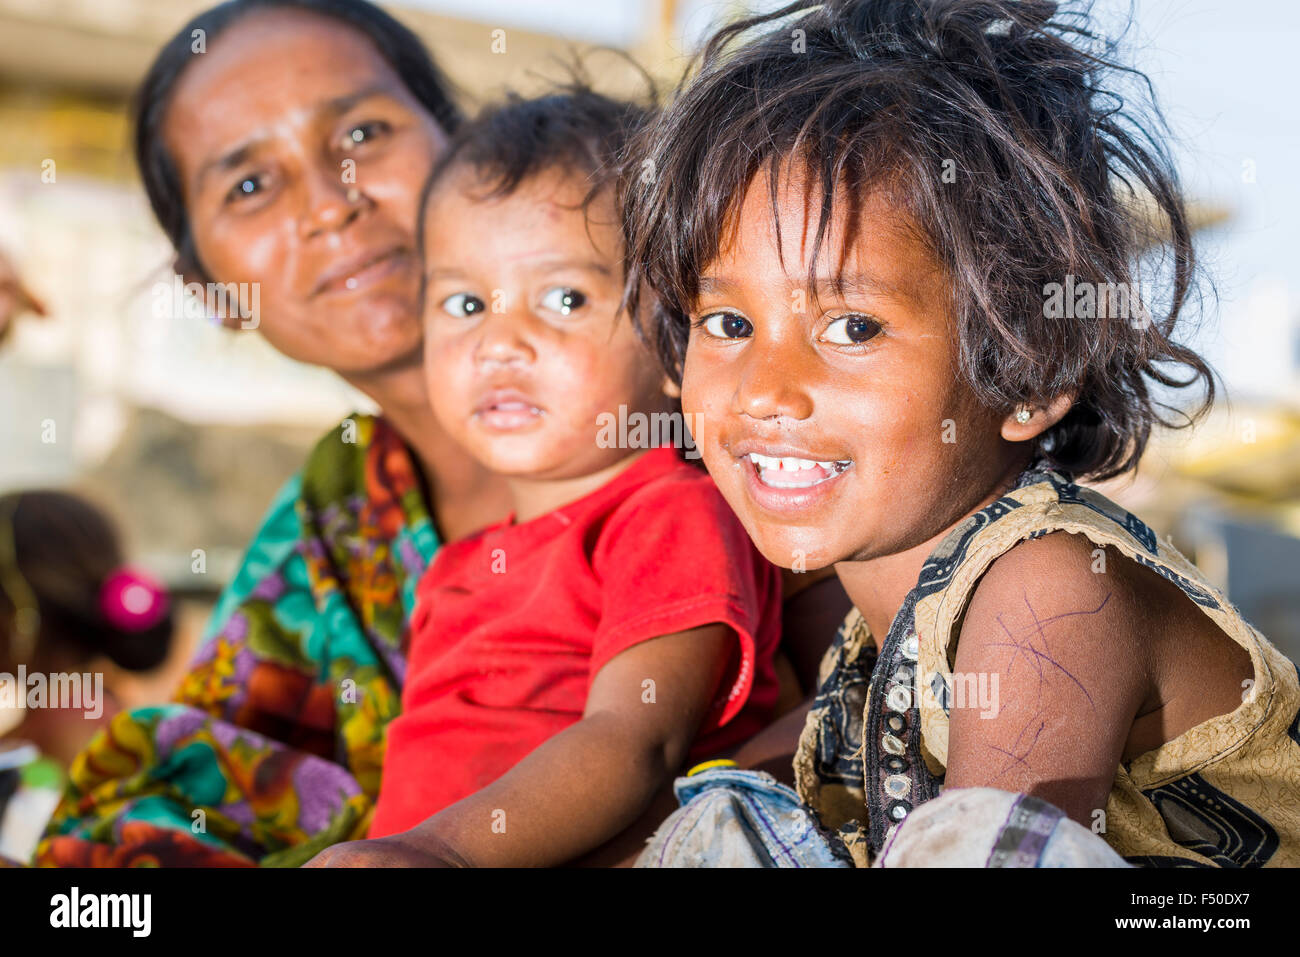 A portrait of two children and a woman, working at a vegetable market Stock Photo